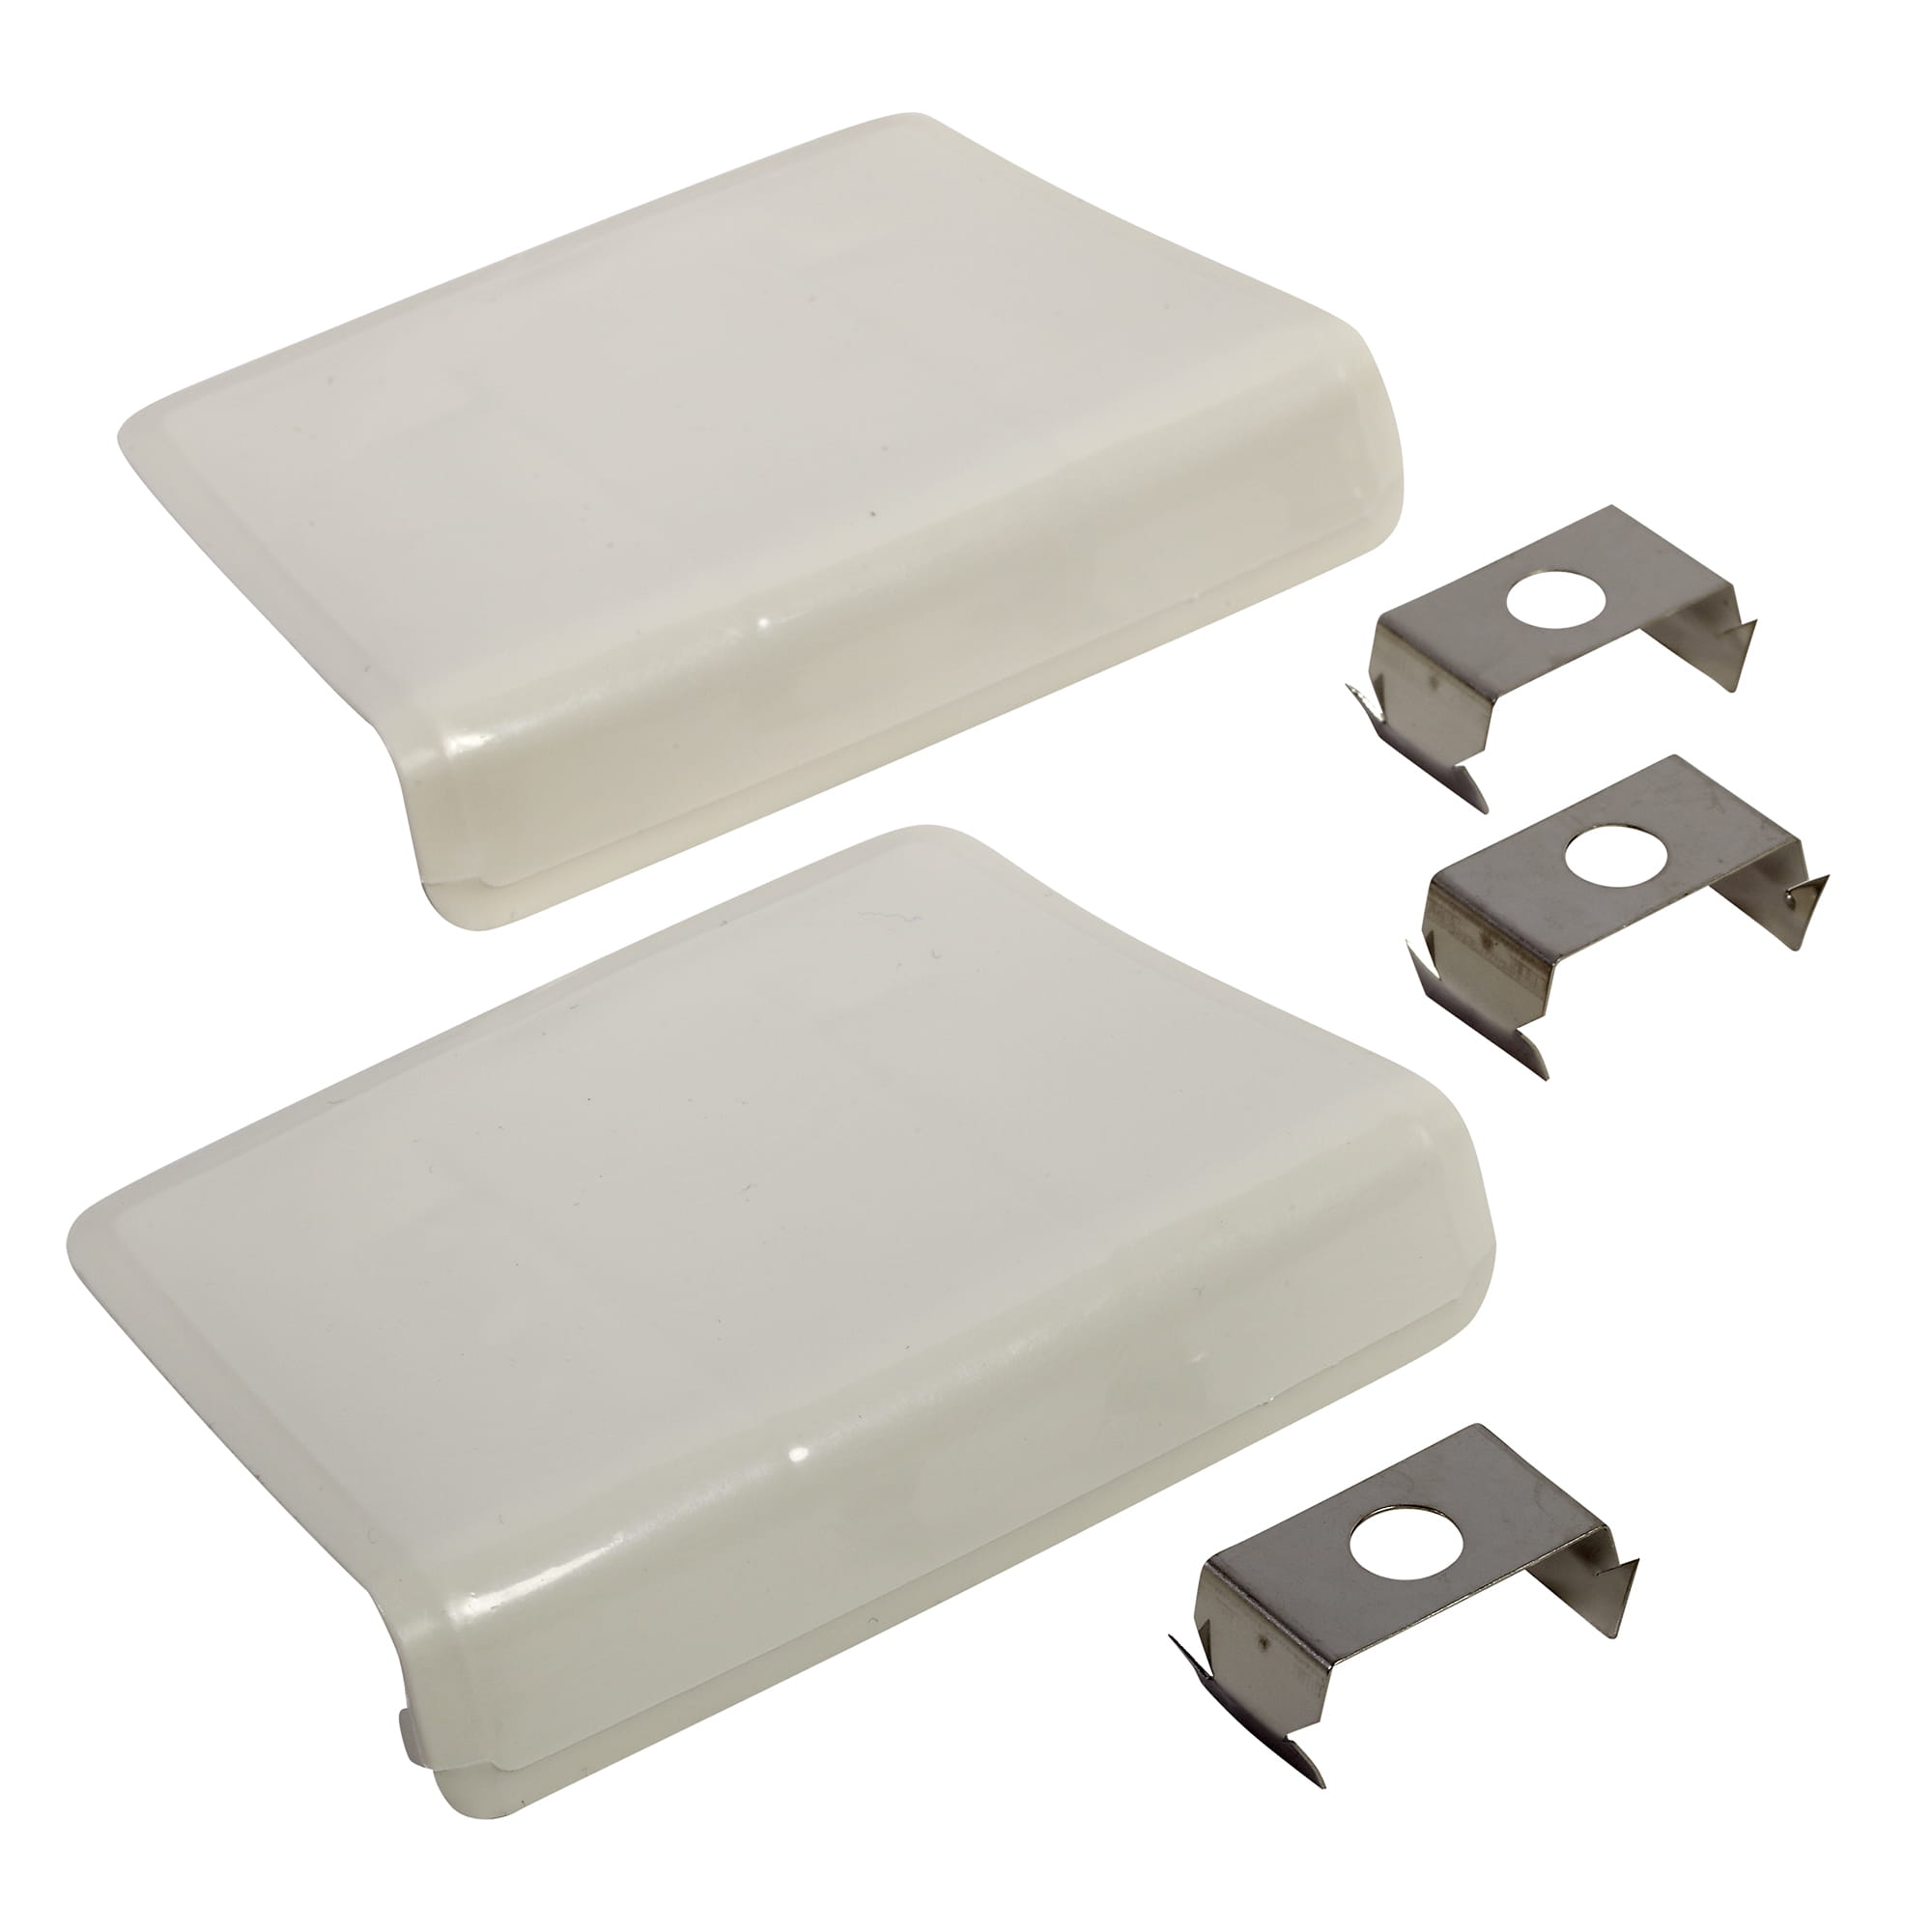 Toilet Bolt Cap and Cover Plate Kit